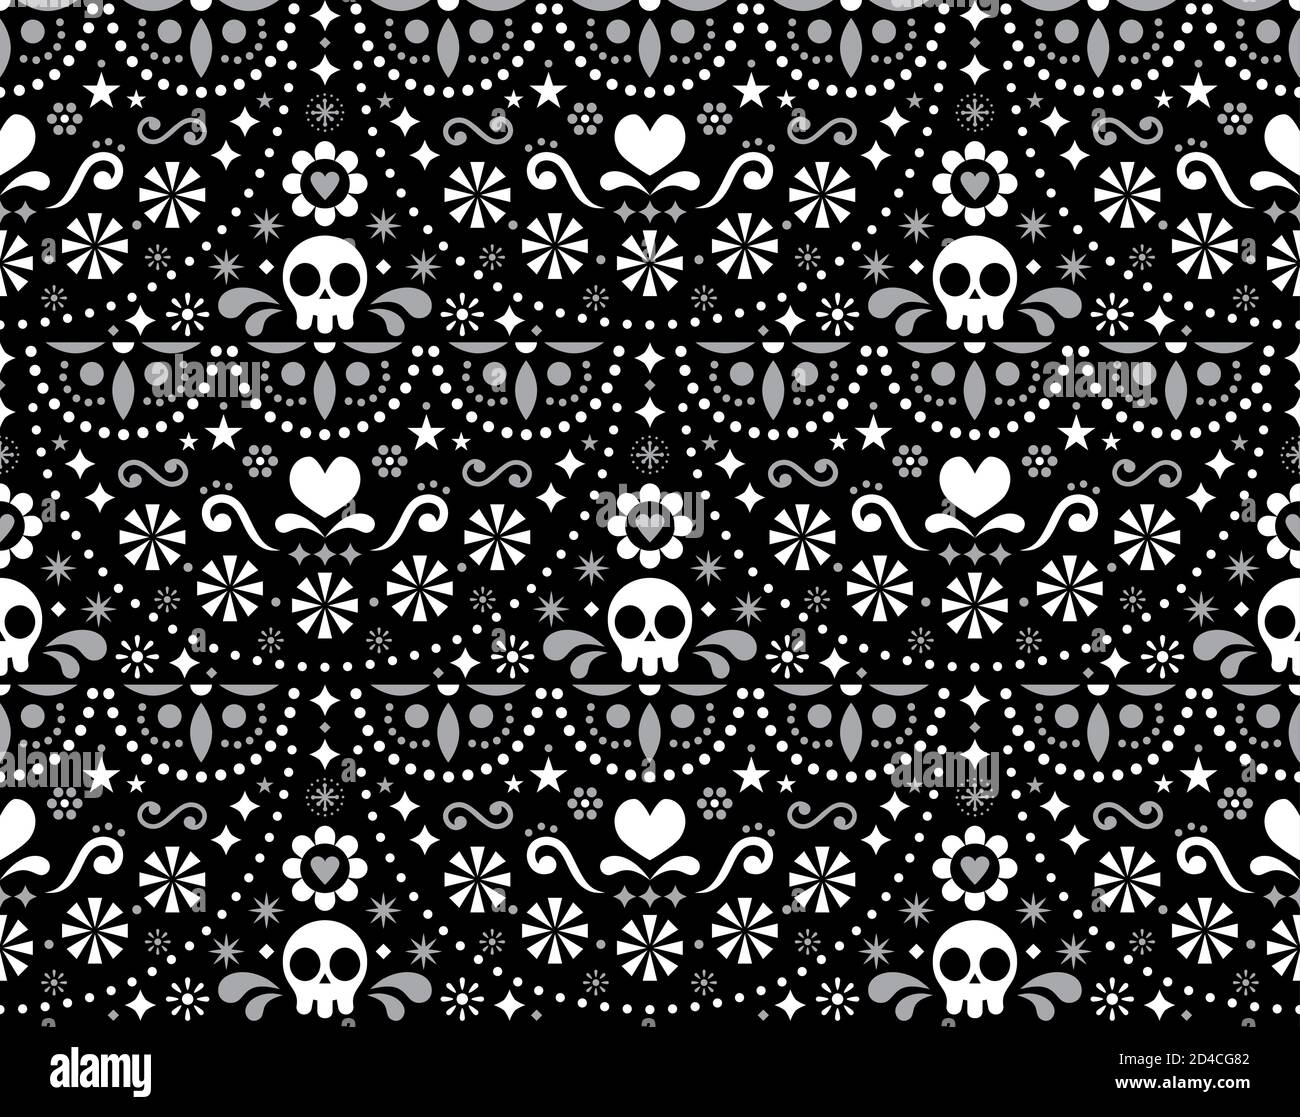 Mexican folk art vector seamless pattern with skulls, Halloween decor, flowers and abstract shapes, white textile design on black background Stock Vector